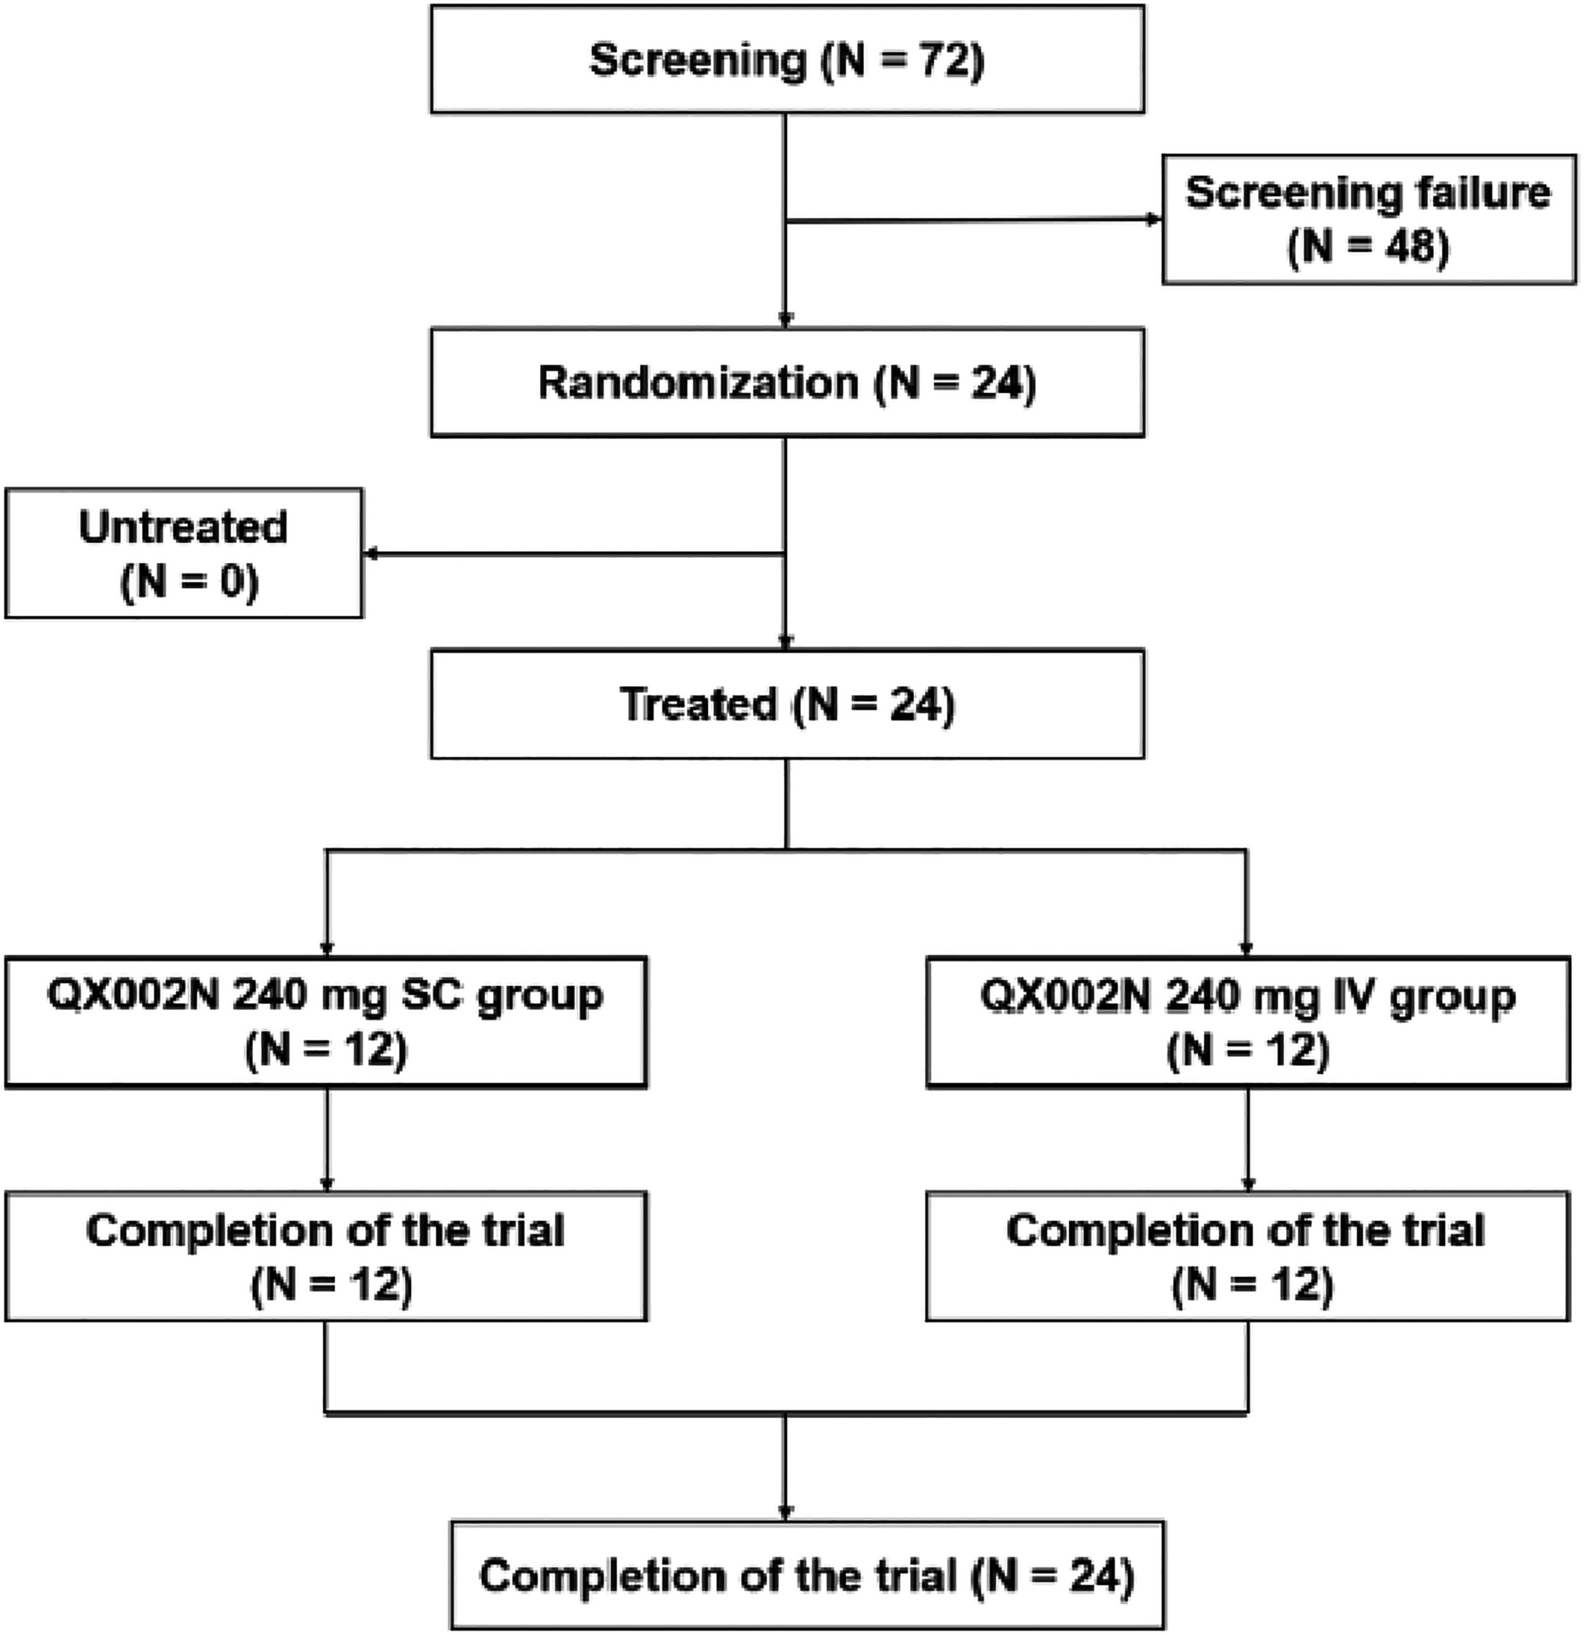 Pharmacokinetics, Safety, and Immunogenicity of Intravenous and Subcutaneous Single-Dose QX002N Injection in Healthy Subjects: A Randomized, Open, Parallel, Single-Center, Phase I Study